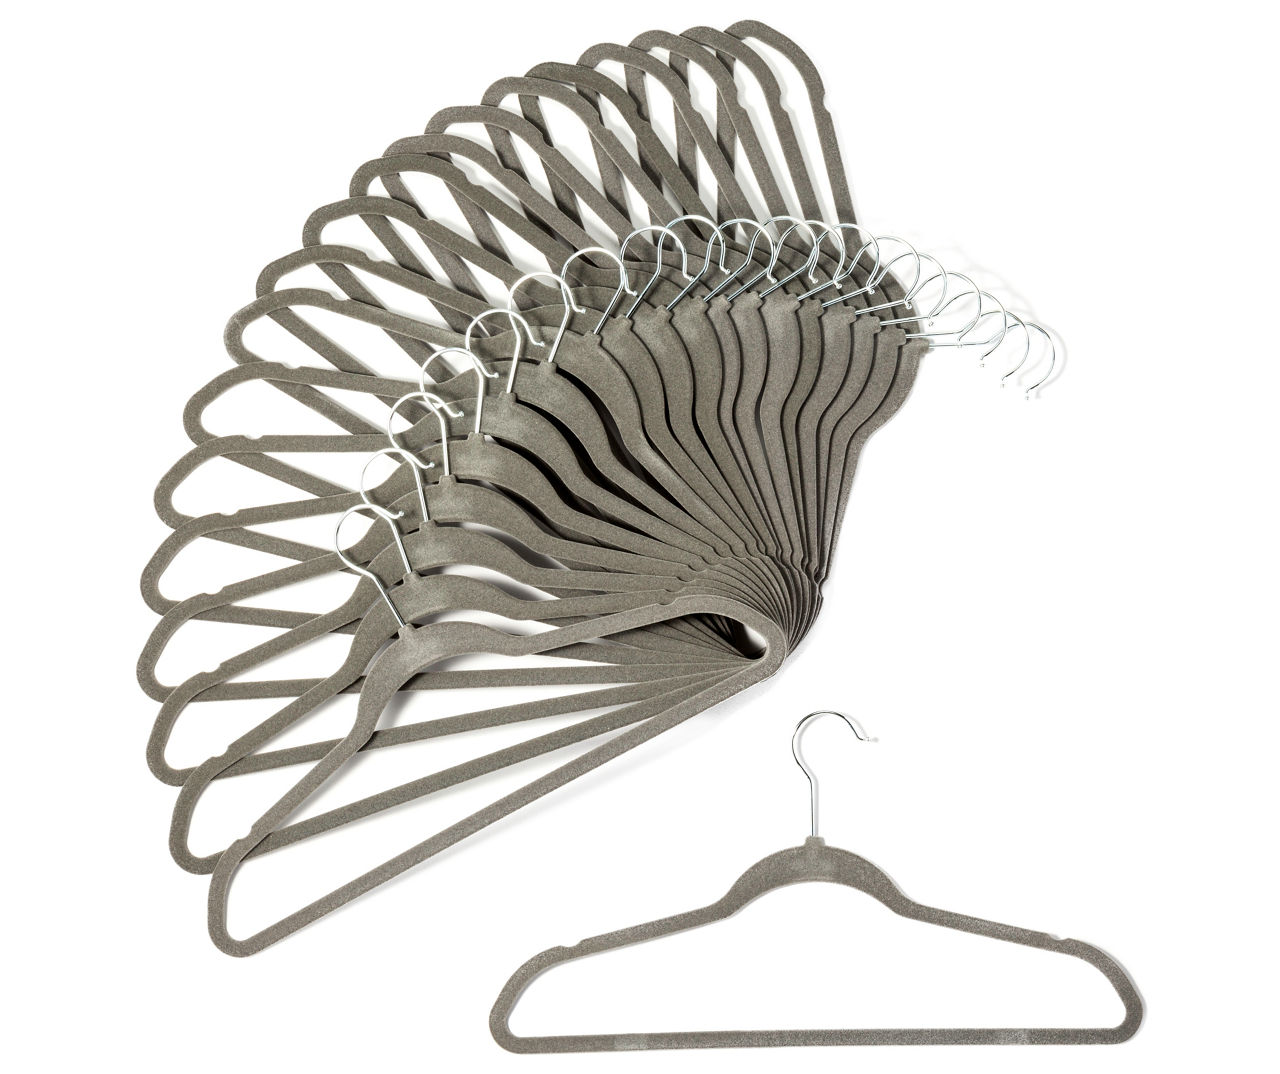 VECELO Wet and Dry Adult Hangers Holds Up To 10 Lbs, Clothes Hangers(25/50  Packs Option) - Bed Bath & Beyond - 39000235